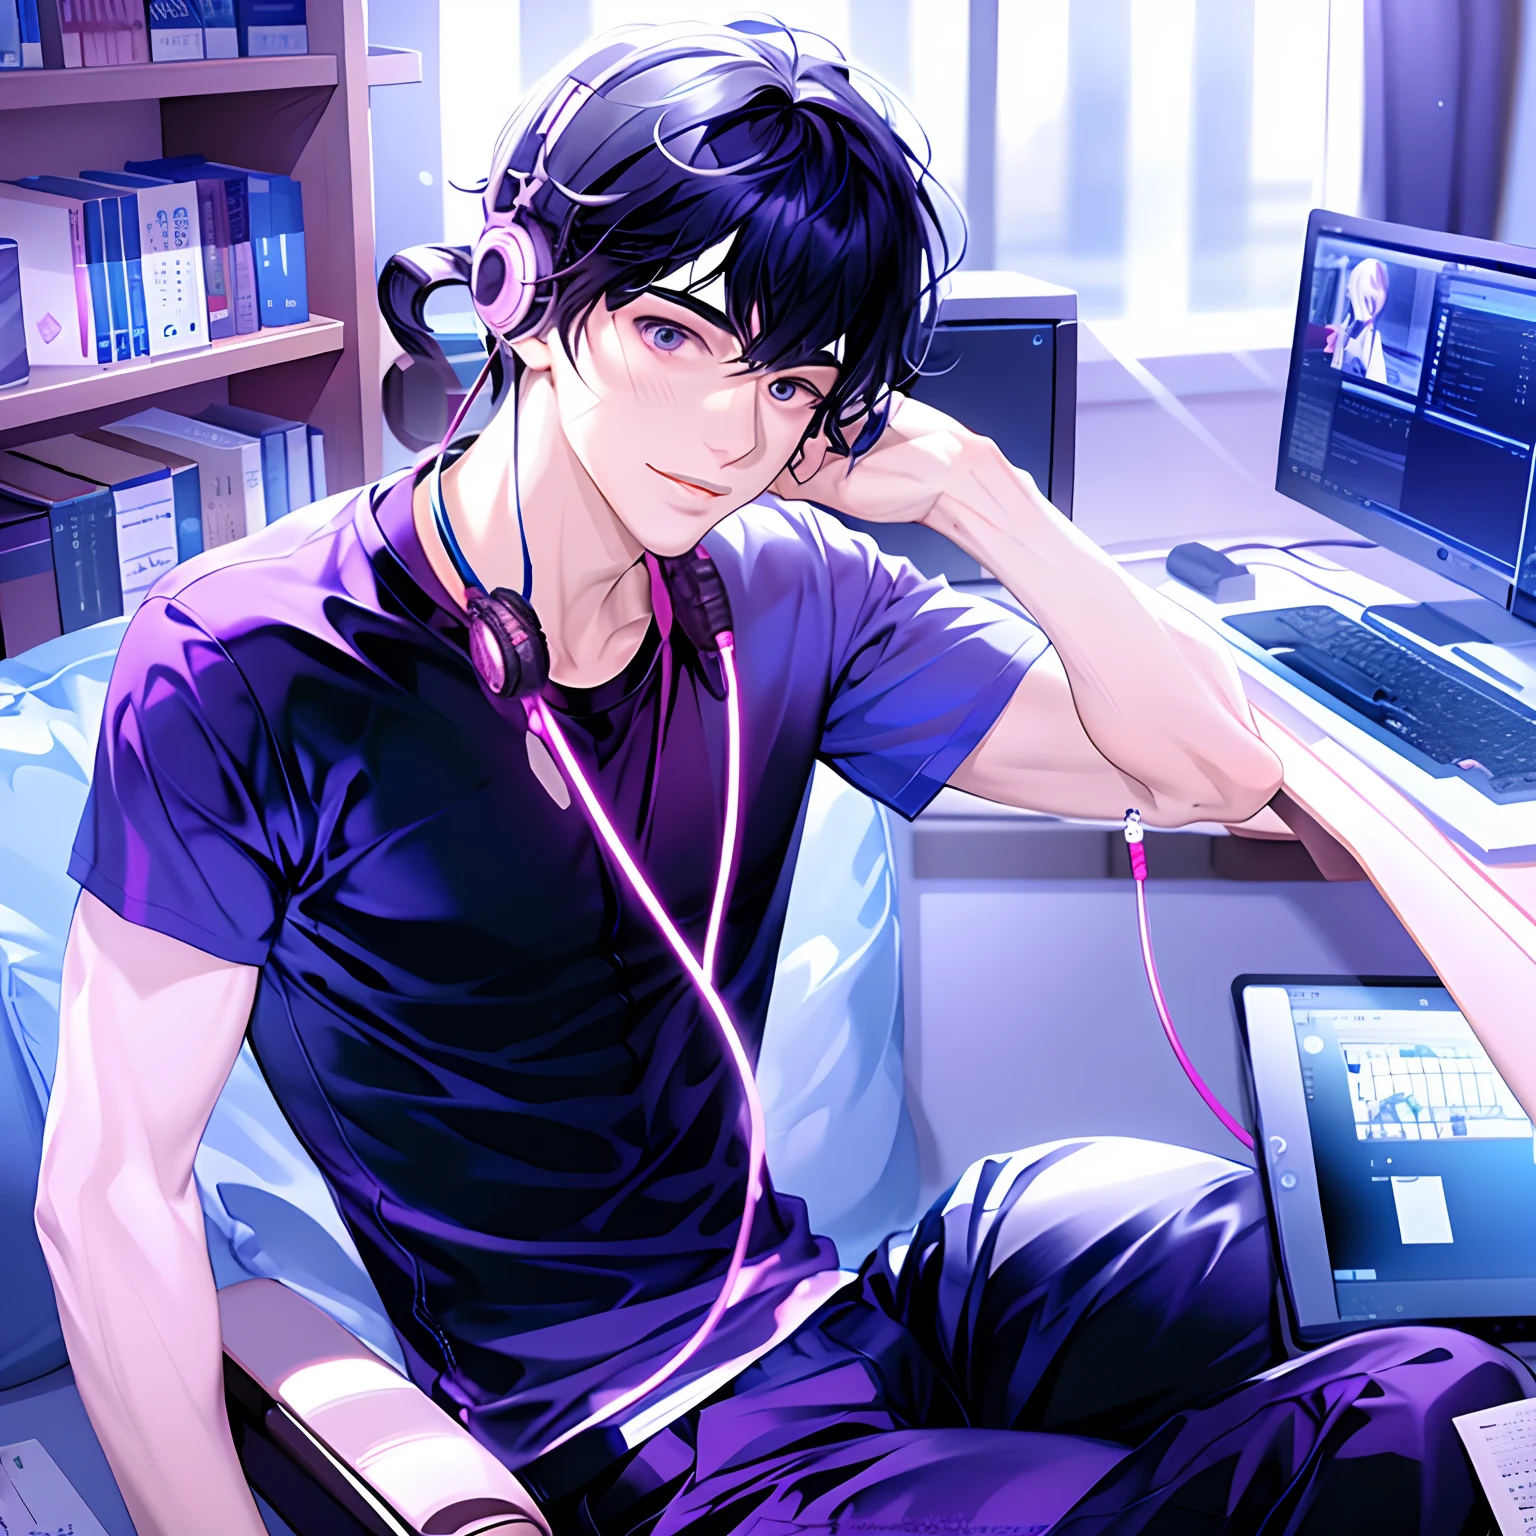 Anime man sitting in a chair with headphones and laptop, digital anime illustration, Handsome Anime Pose, Smooth Anime CG Art, anime handsome guy, young anime man, With headphones, kawacy, digital anime art, ig studios anime style, High quality anime art style, anime moe art style, digital art on pixiv, painted in anime painter studio